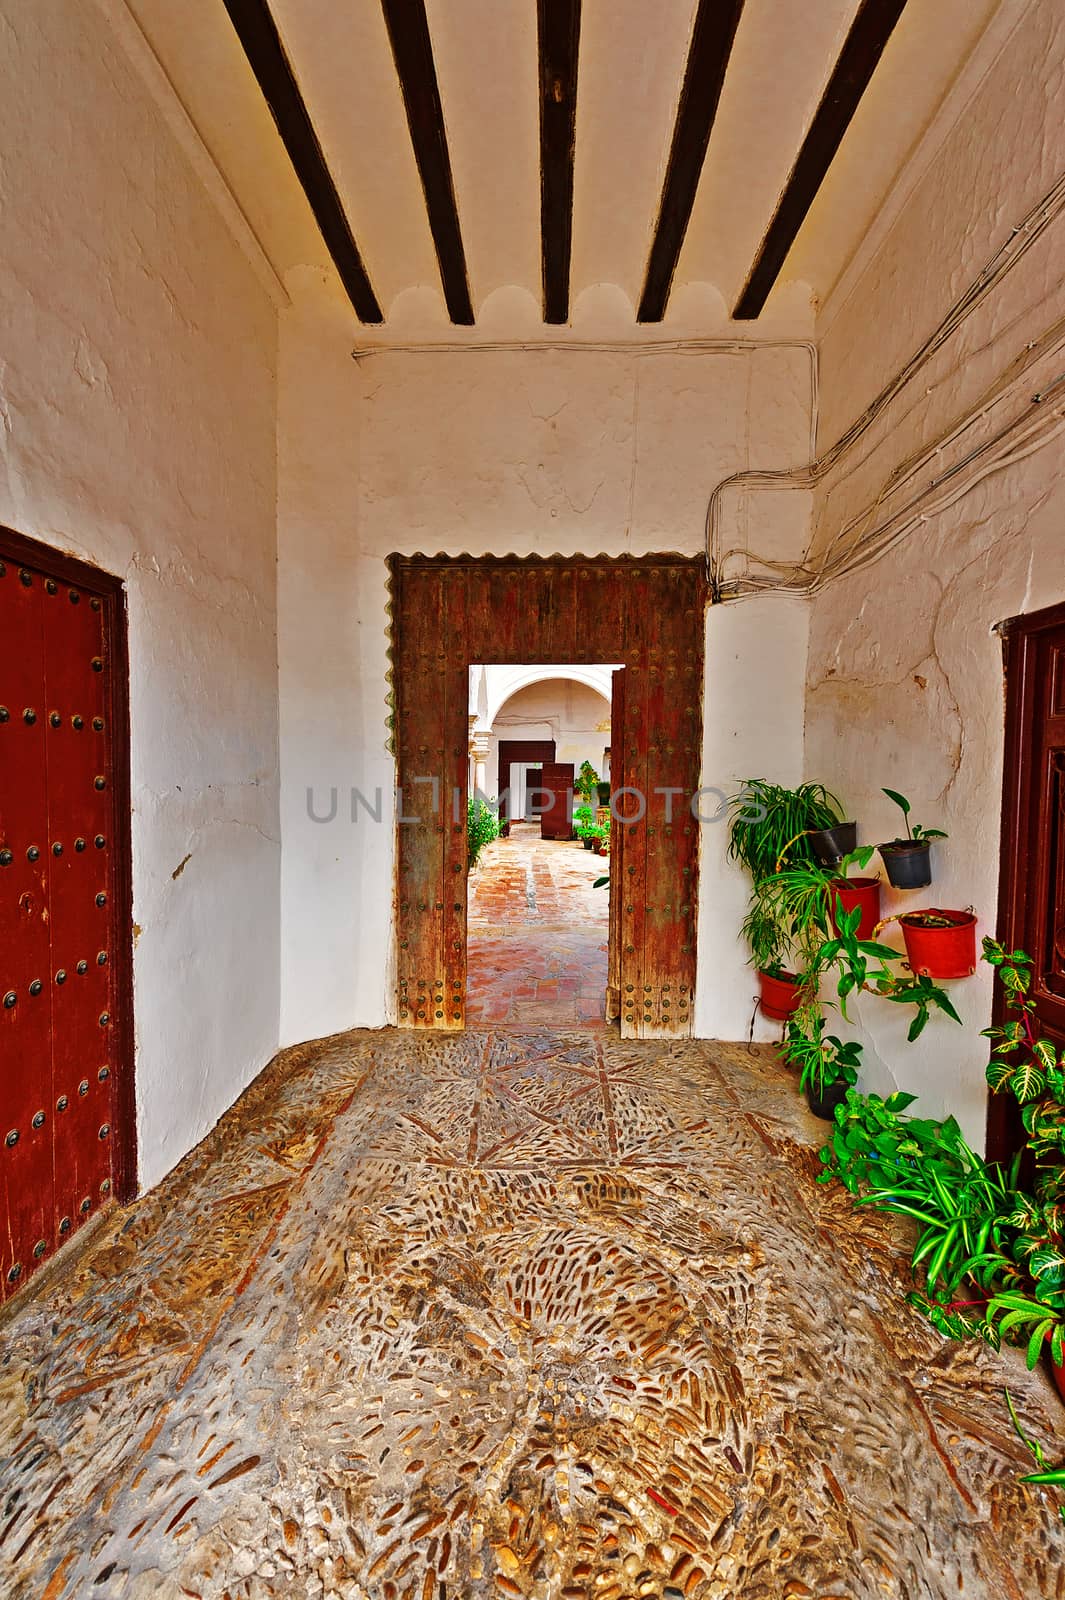 Enfilade in the Courtyard of Spanish House